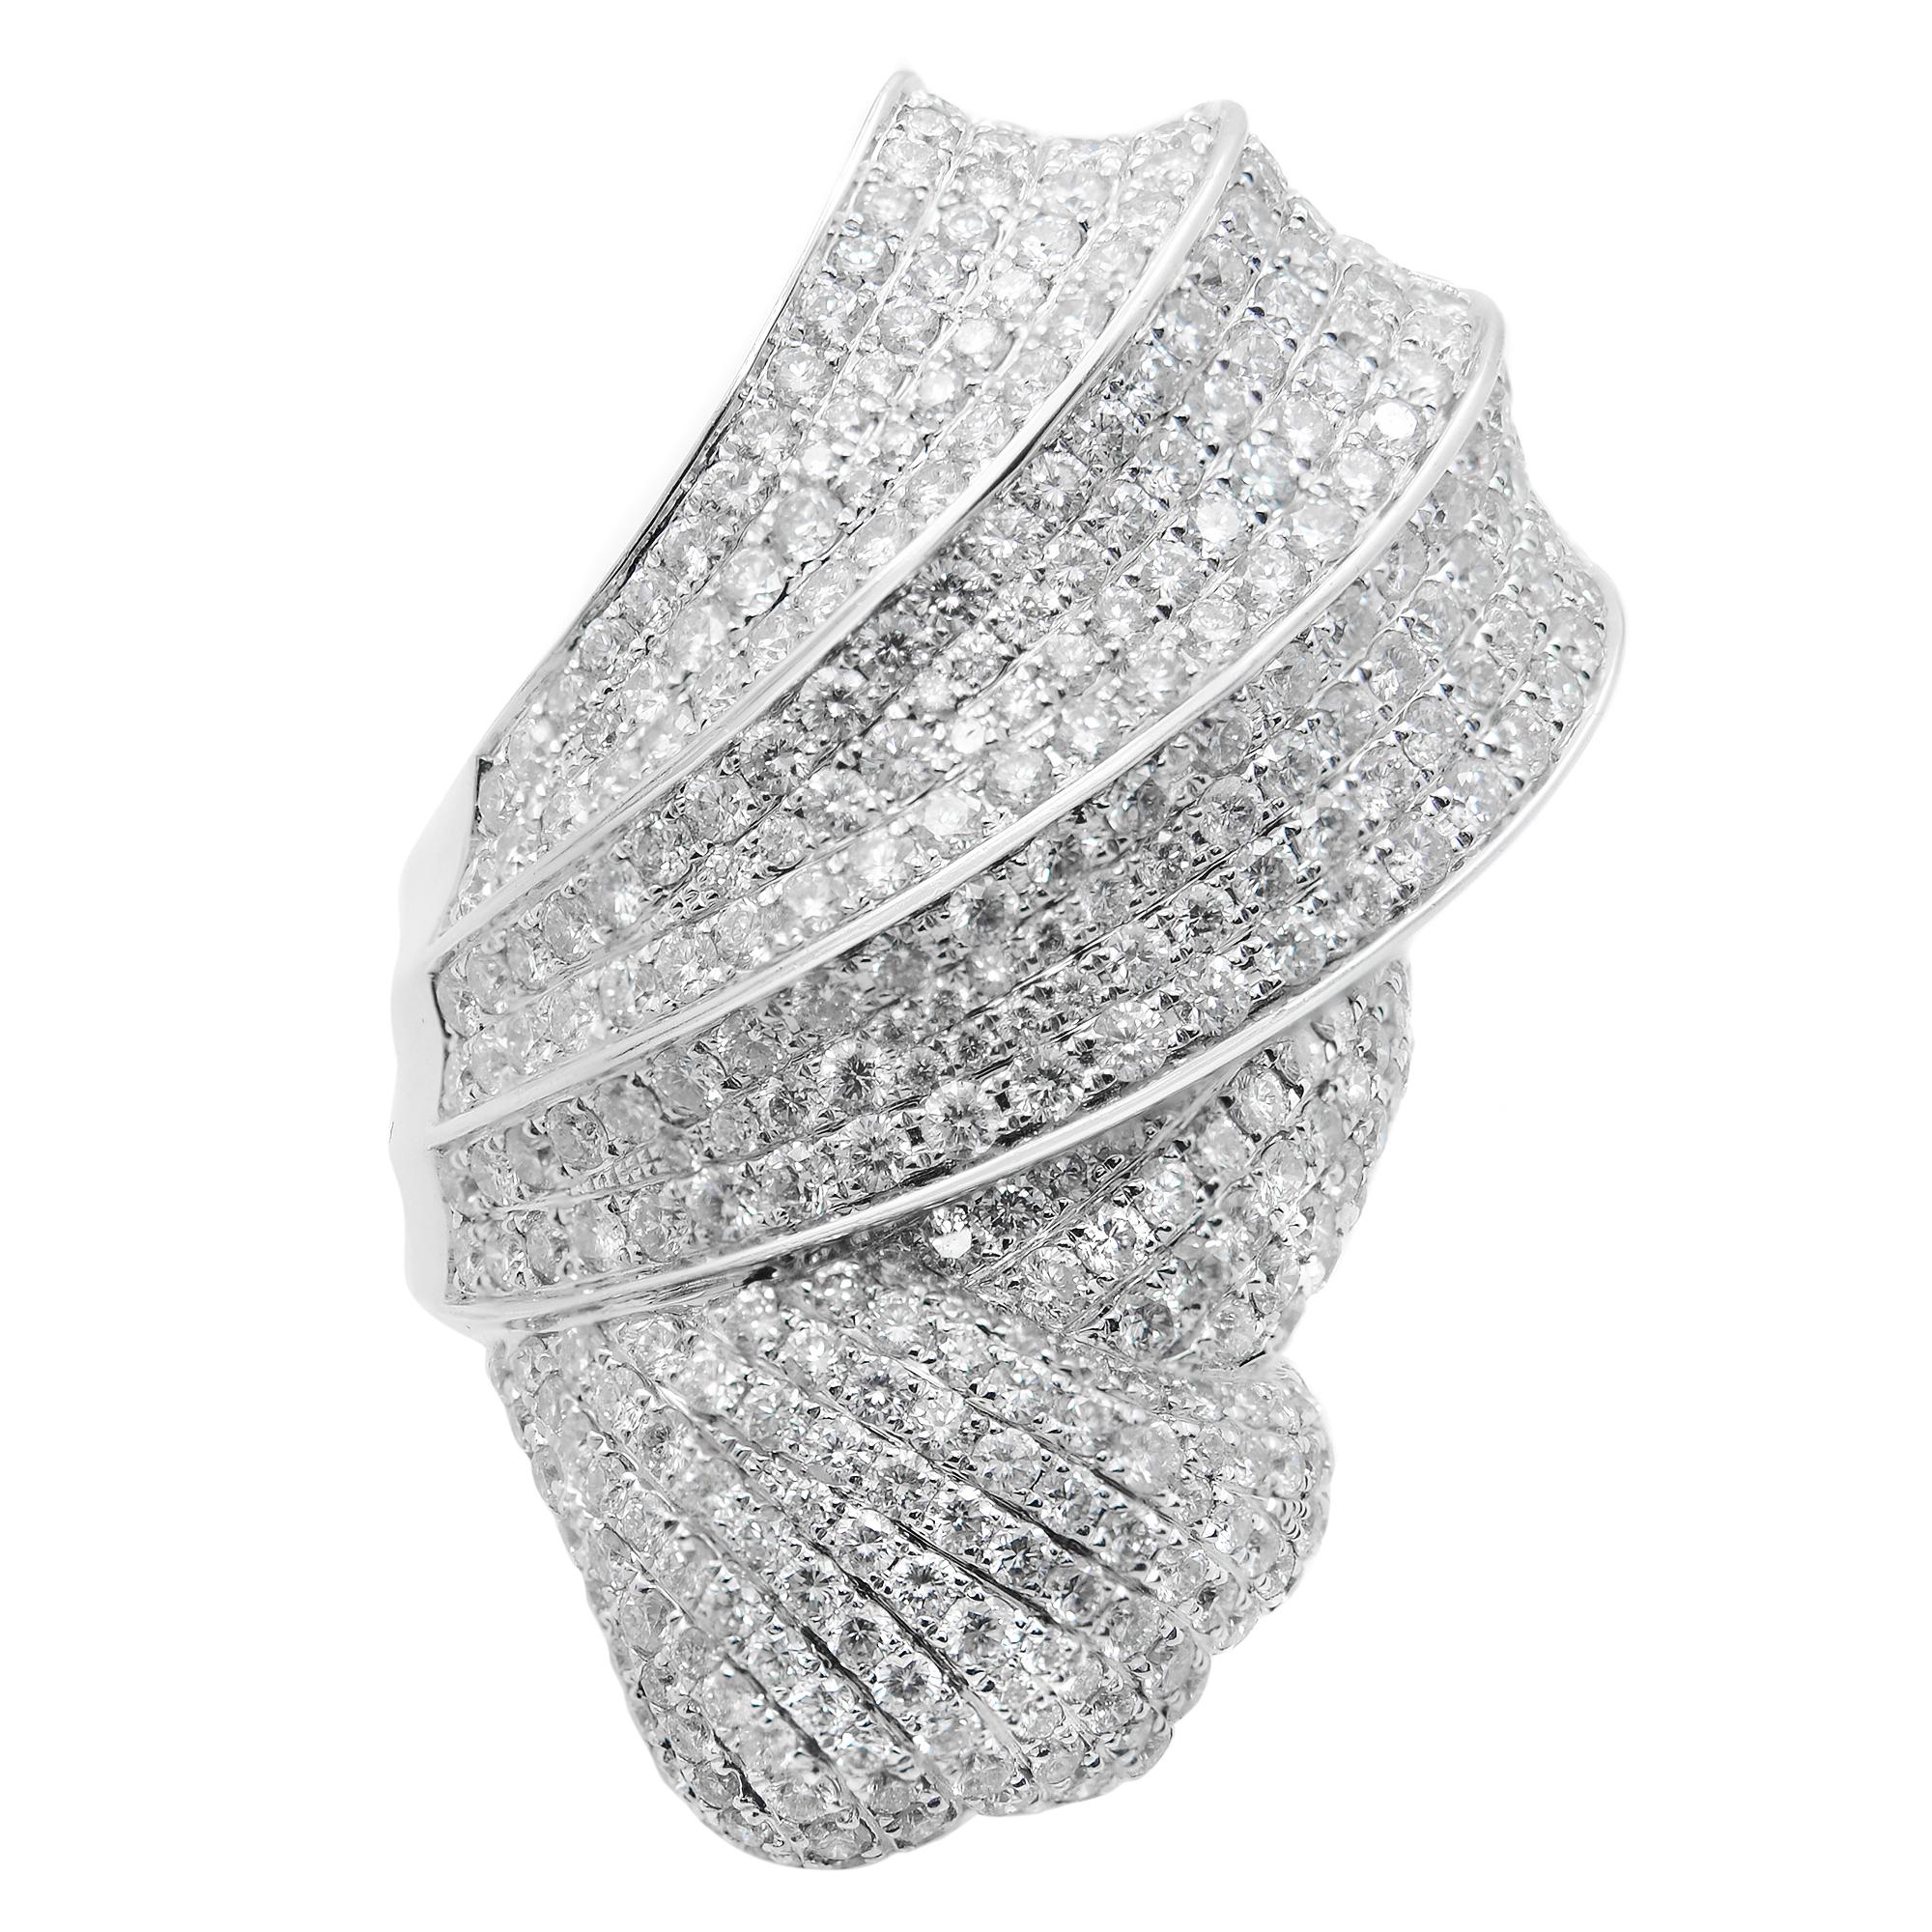 Rachel Koen Diamond Cocktail Ring 18K White Gold 4.50 Cttw In New Condition For Sale In New York, NY